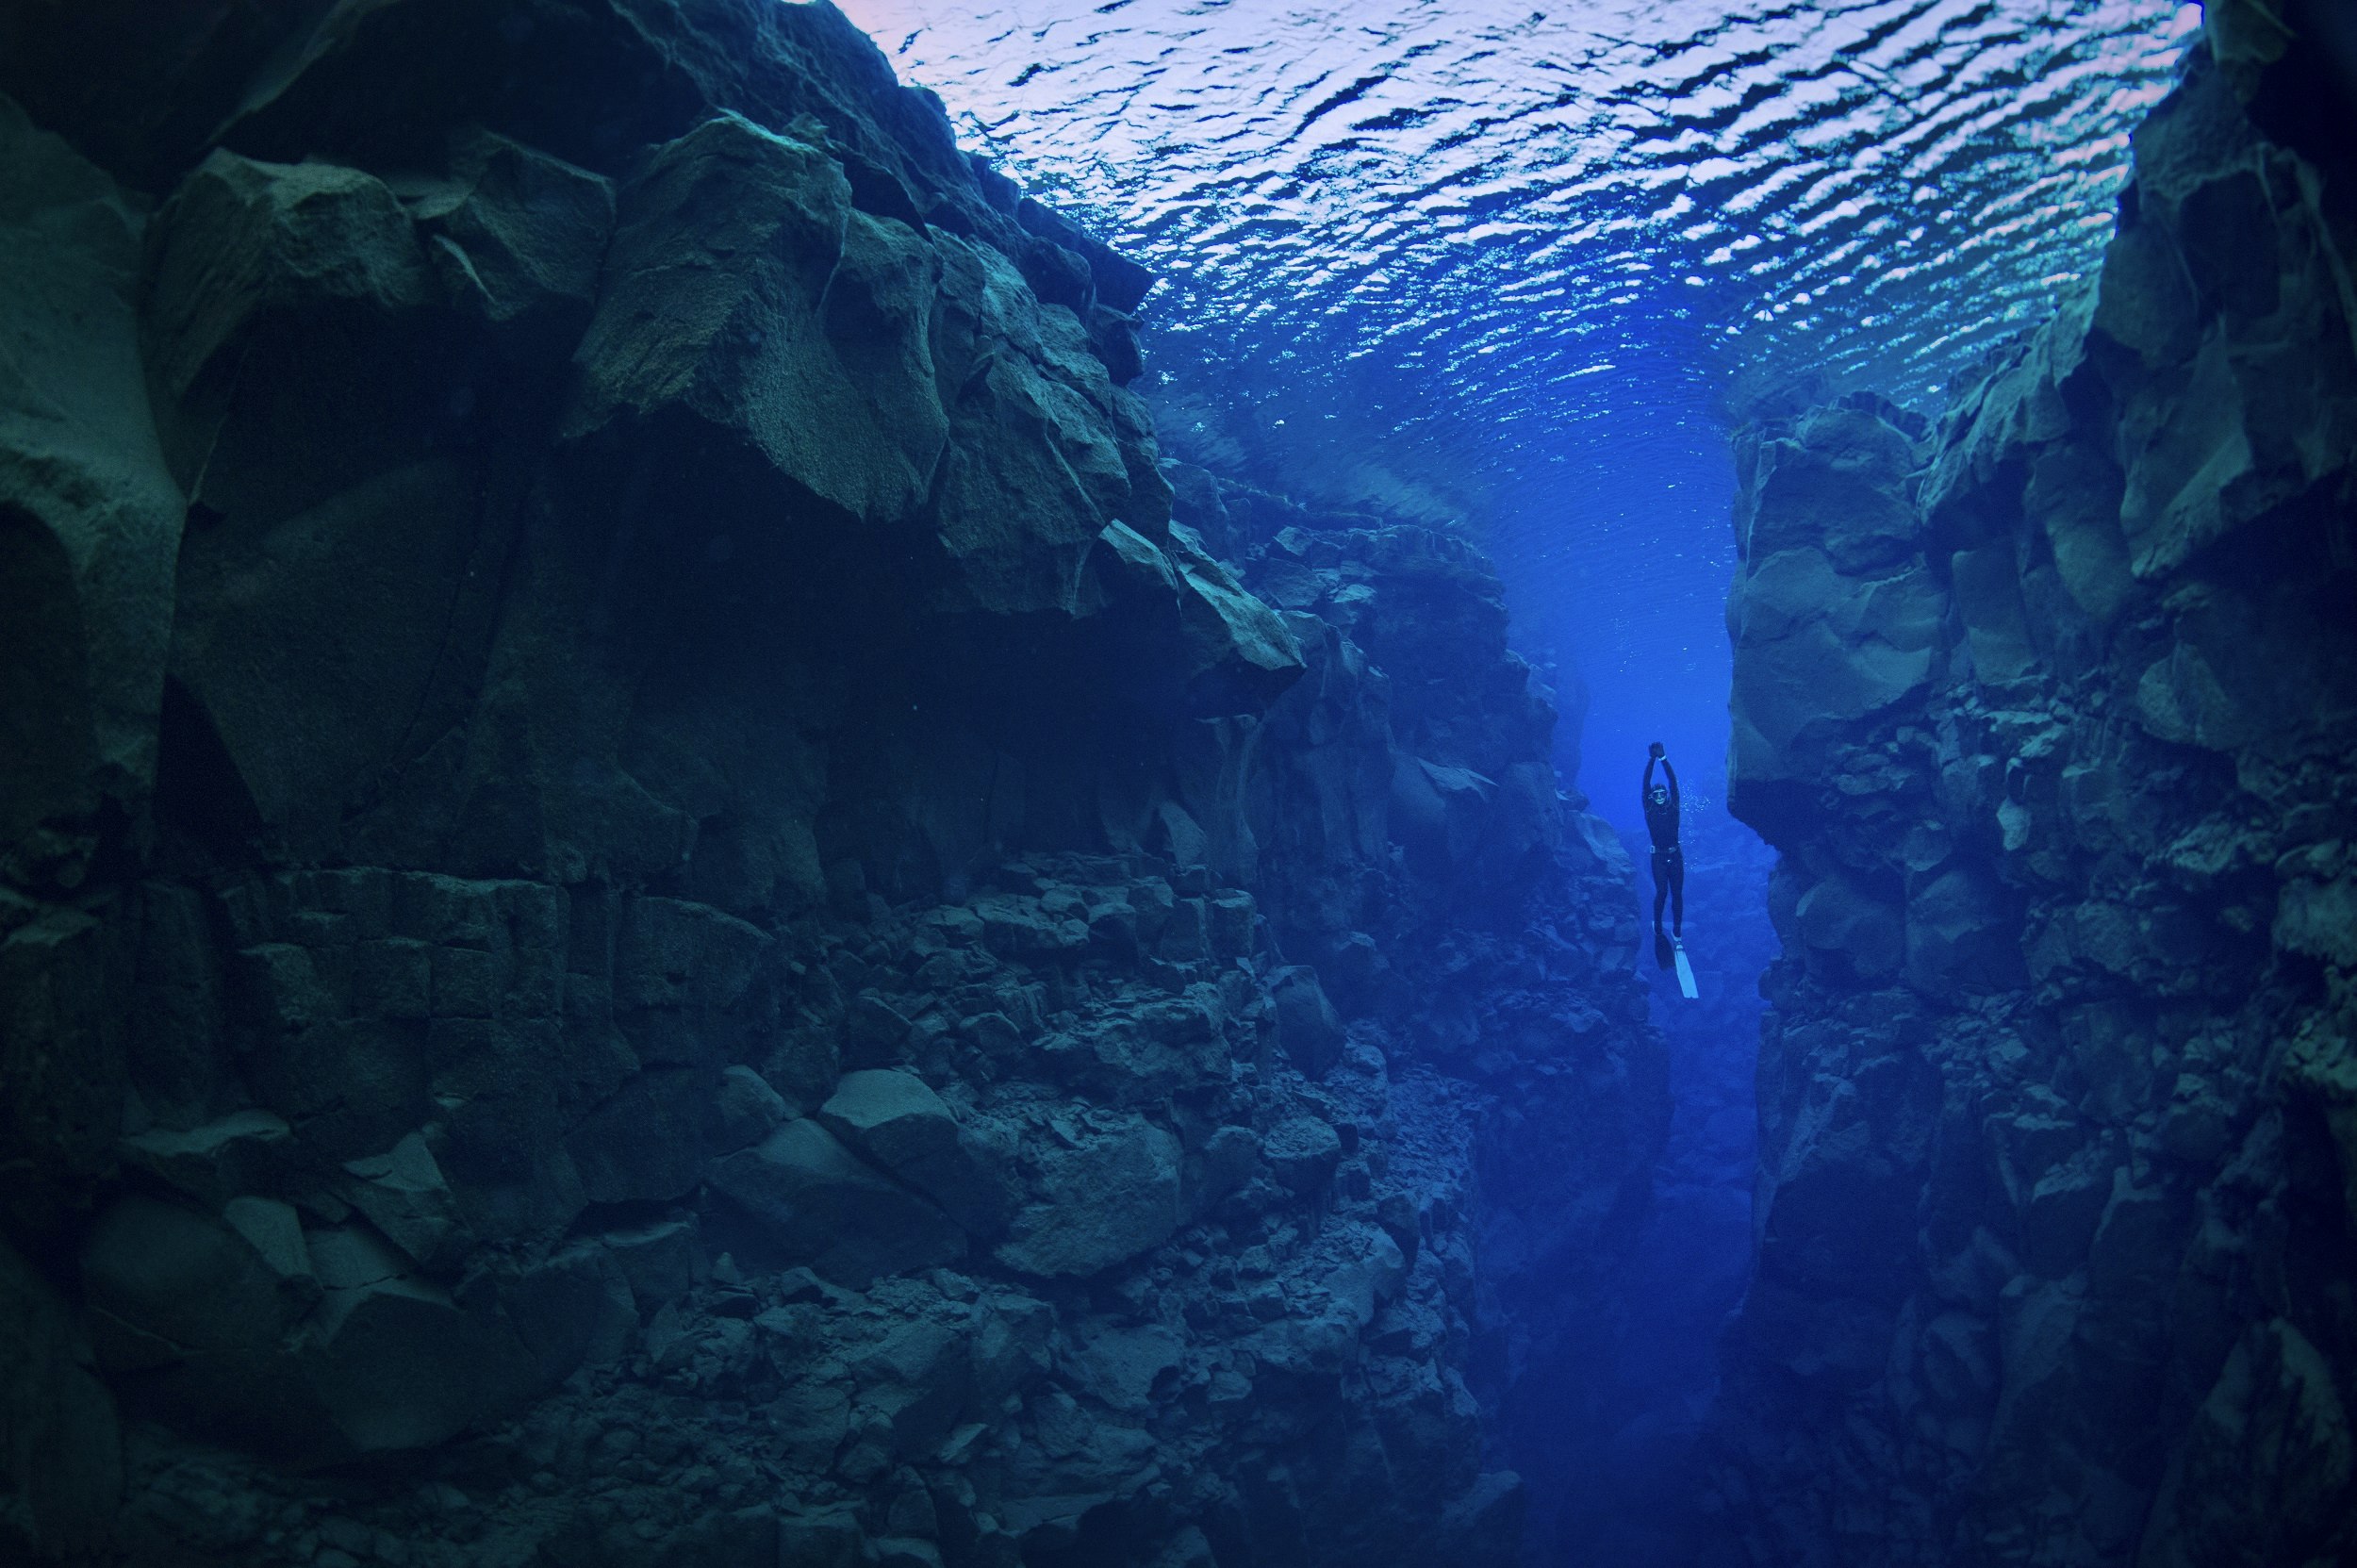 A free diver ascends up the narrow Silfra Fissure, which separates two continental plates.